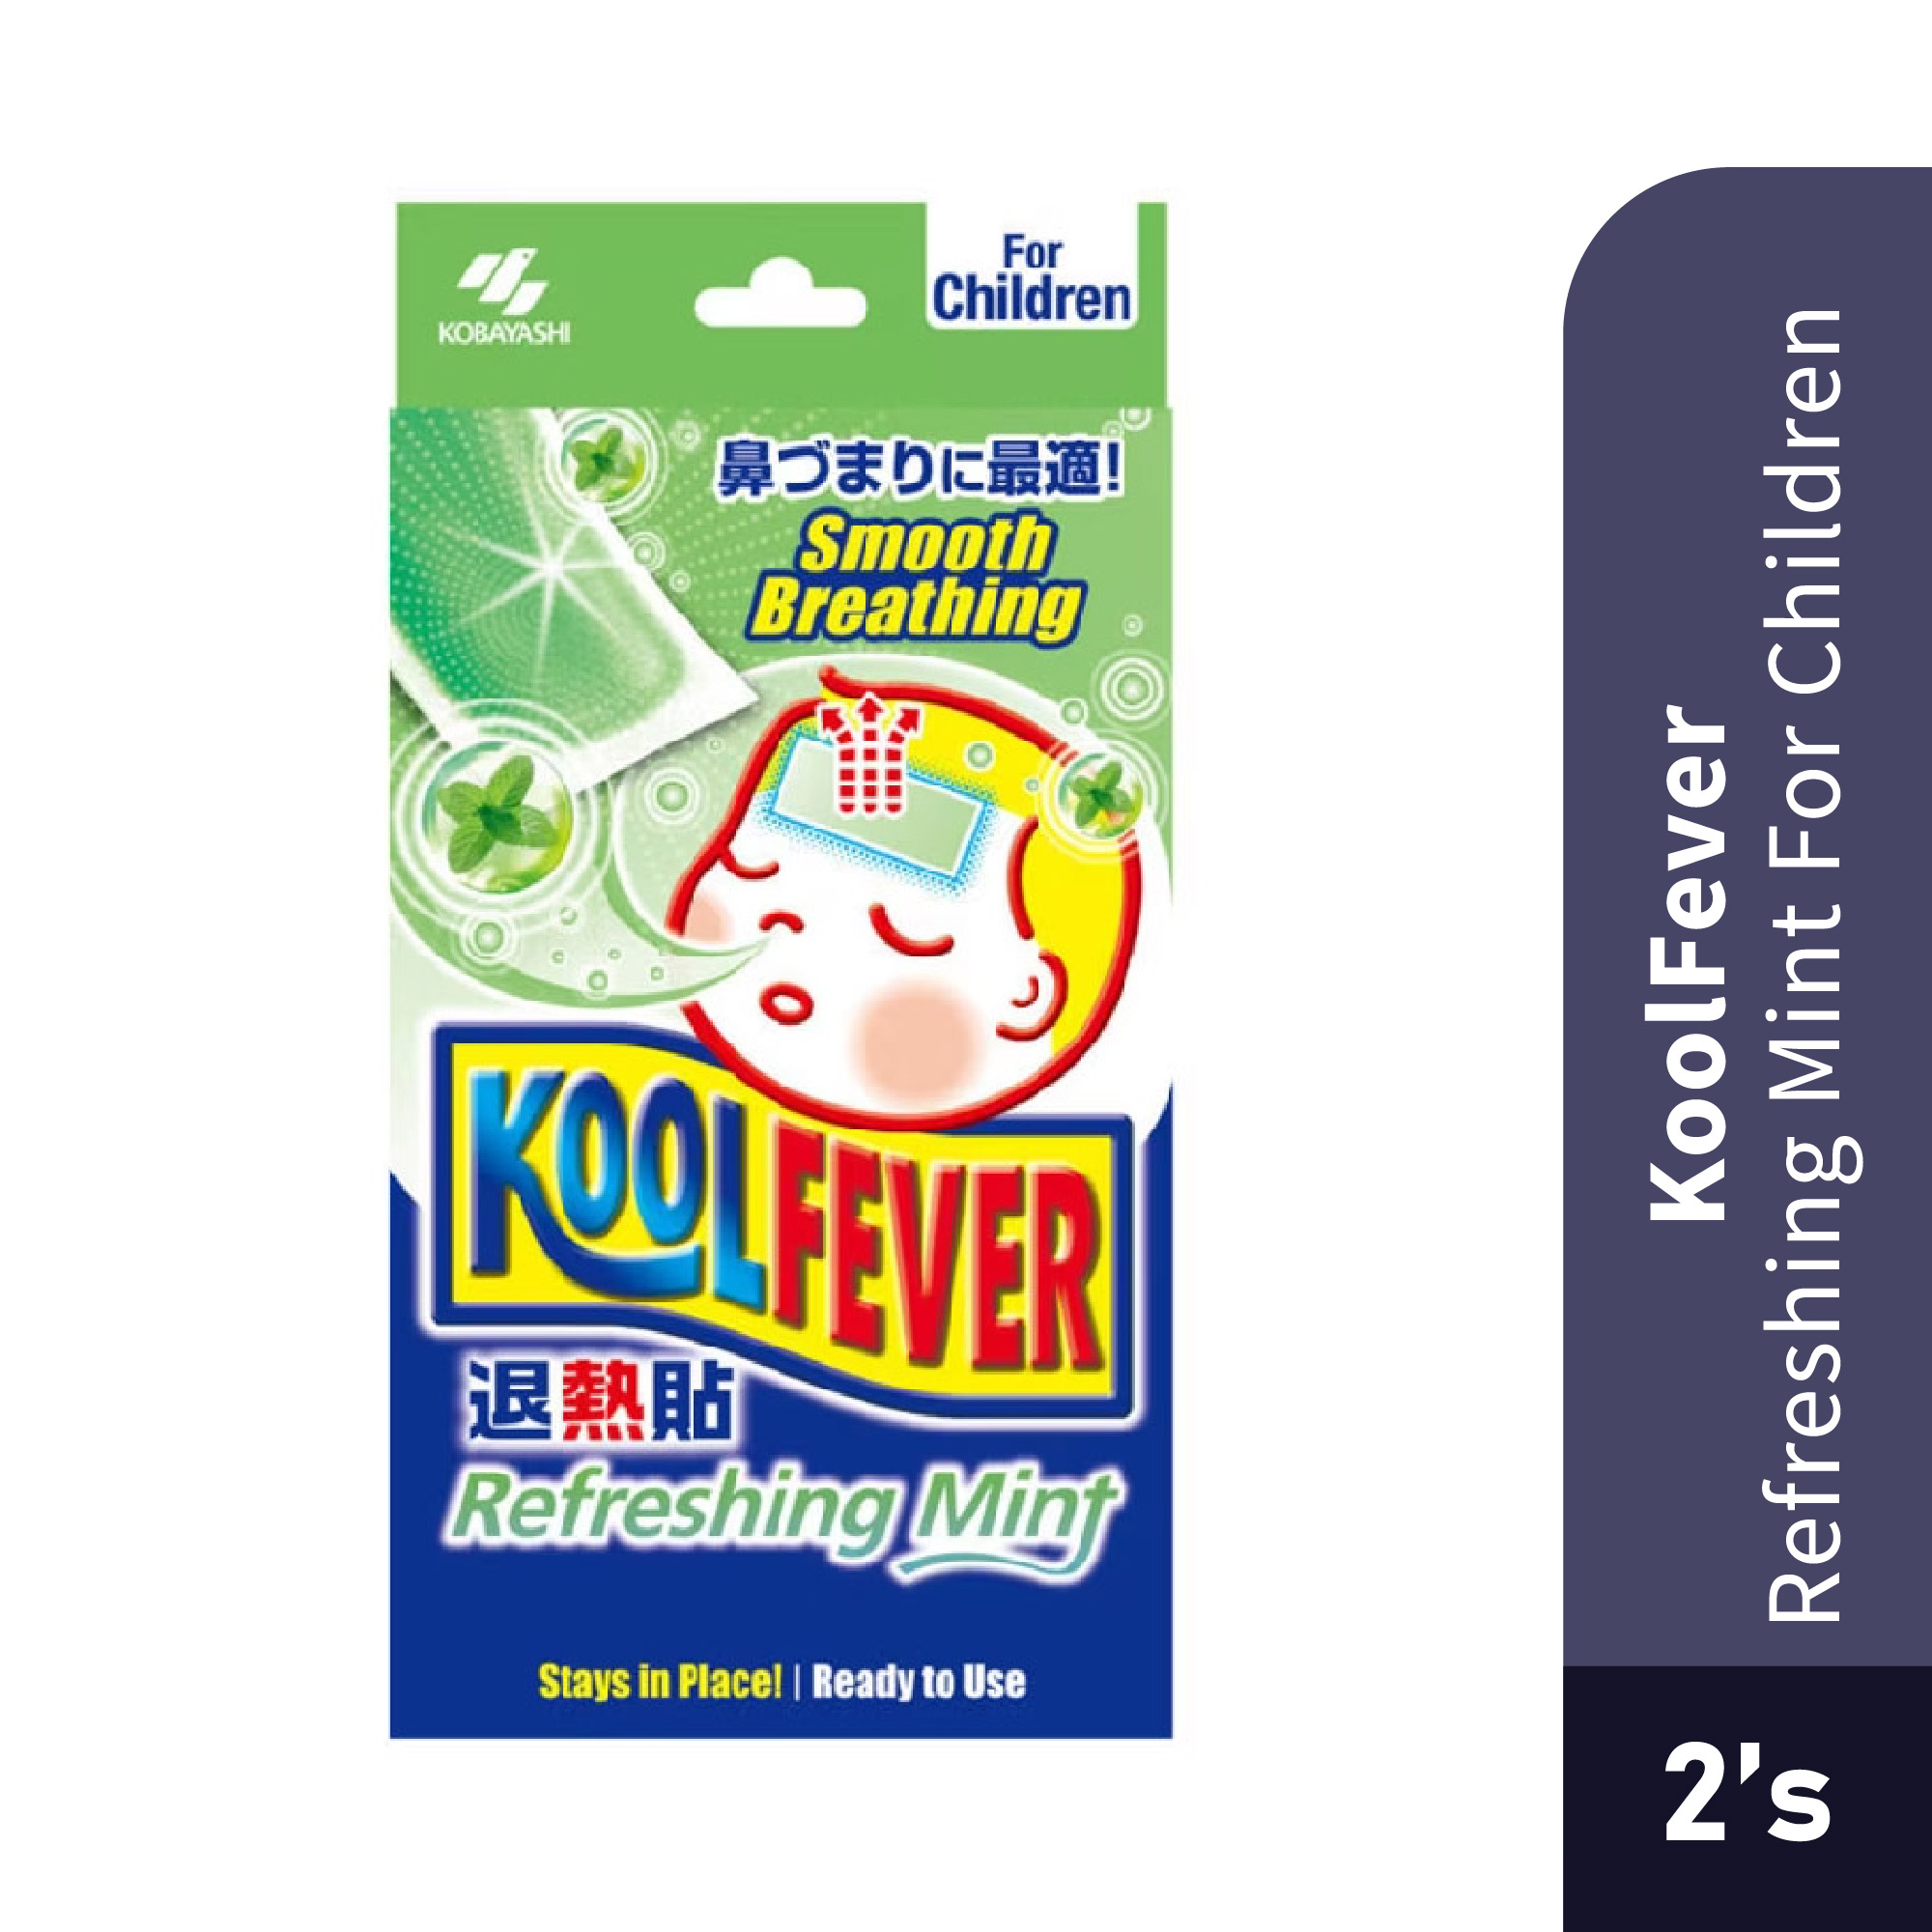 KOOLFEVER Refreshing Mint 2's for Kids, Cool Fever for Fever, Kool Fever with Cooling Effect, Cool Temperature, 退热贴